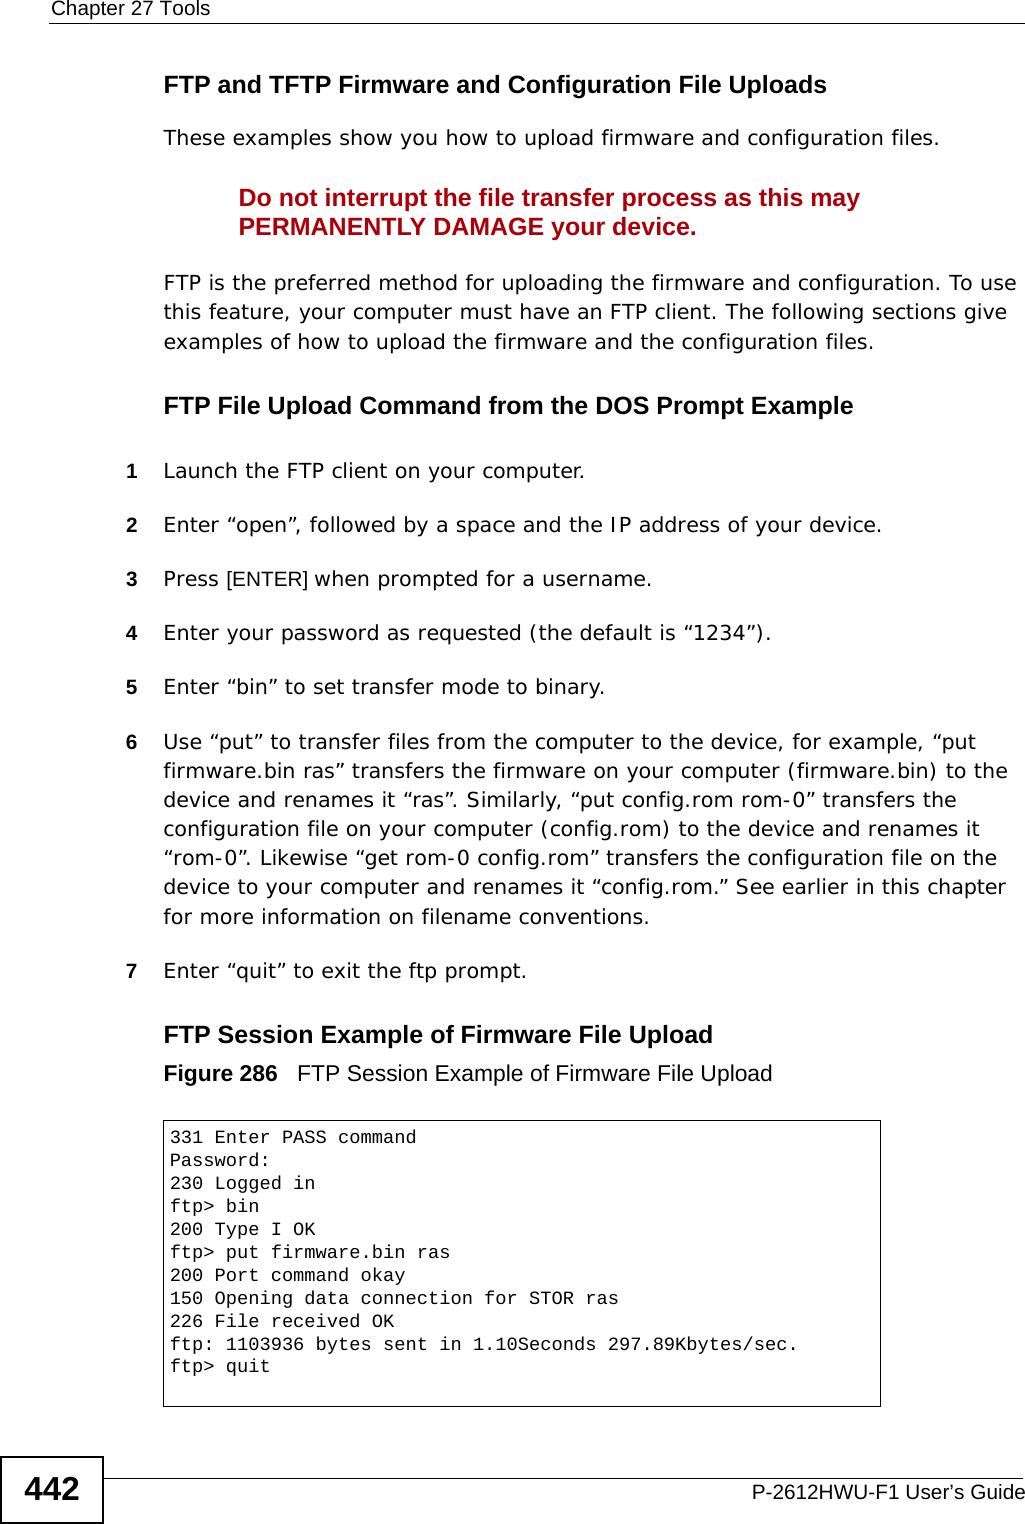 Chapter 27 ToolsP-2612HWU-F1 User’s Guide442FTP and TFTP Firmware and Configuration File UploadsThese examples show you how to upload firmware and configuration files. Do not interrupt the file transfer process as this may PERMANENTLY DAMAGE your device. FTP is the preferred method for uploading the firmware and configuration. To use this feature, your computer must have an FTP client. The following sections give examples of how to upload the firmware and the configuration files.FTP File Upload Command from the DOS Prompt Example1Launch the FTP client on your computer.2Enter “open”, followed by a space and the IP address of your device. 3Press [ENTER] when prompted for a username.4Enter your password as requested (the default is “1234”).5Enter “bin” to set transfer mode to binary.6Use “put” to transfer files from the computer to the device, for example, “put firmware.bin ras” transfers the firmware on your computer (firmware.bin) to the device and renames it “ras”. Similarly, “put config.rom rom-0” transfers the configuration file on your computer (config.rom) to the device and renames it “rom-0”. Likewise “get rom-0 config.rom” transfers the configuration file on the device to your computer and renames it “config.rom.” See earlier in this chapter for more information on filename conventions.7Enter “quit” to exit the ftp prompt.FTP Session Example of Firmware File UploadFigure 286   FTP Session Example of Firmware File Upload331 Enter PASS commandPassword:230 Logged inftp&gt; bin200 Type I OKftp&gt; put firmware.bin ras200 Port command okay150 Opening data connection for STOR ras226 File received OKftp: 1103936 bytes sent in 1.10Seconds 297.89Kbytes/sec.ftp&gt; quit